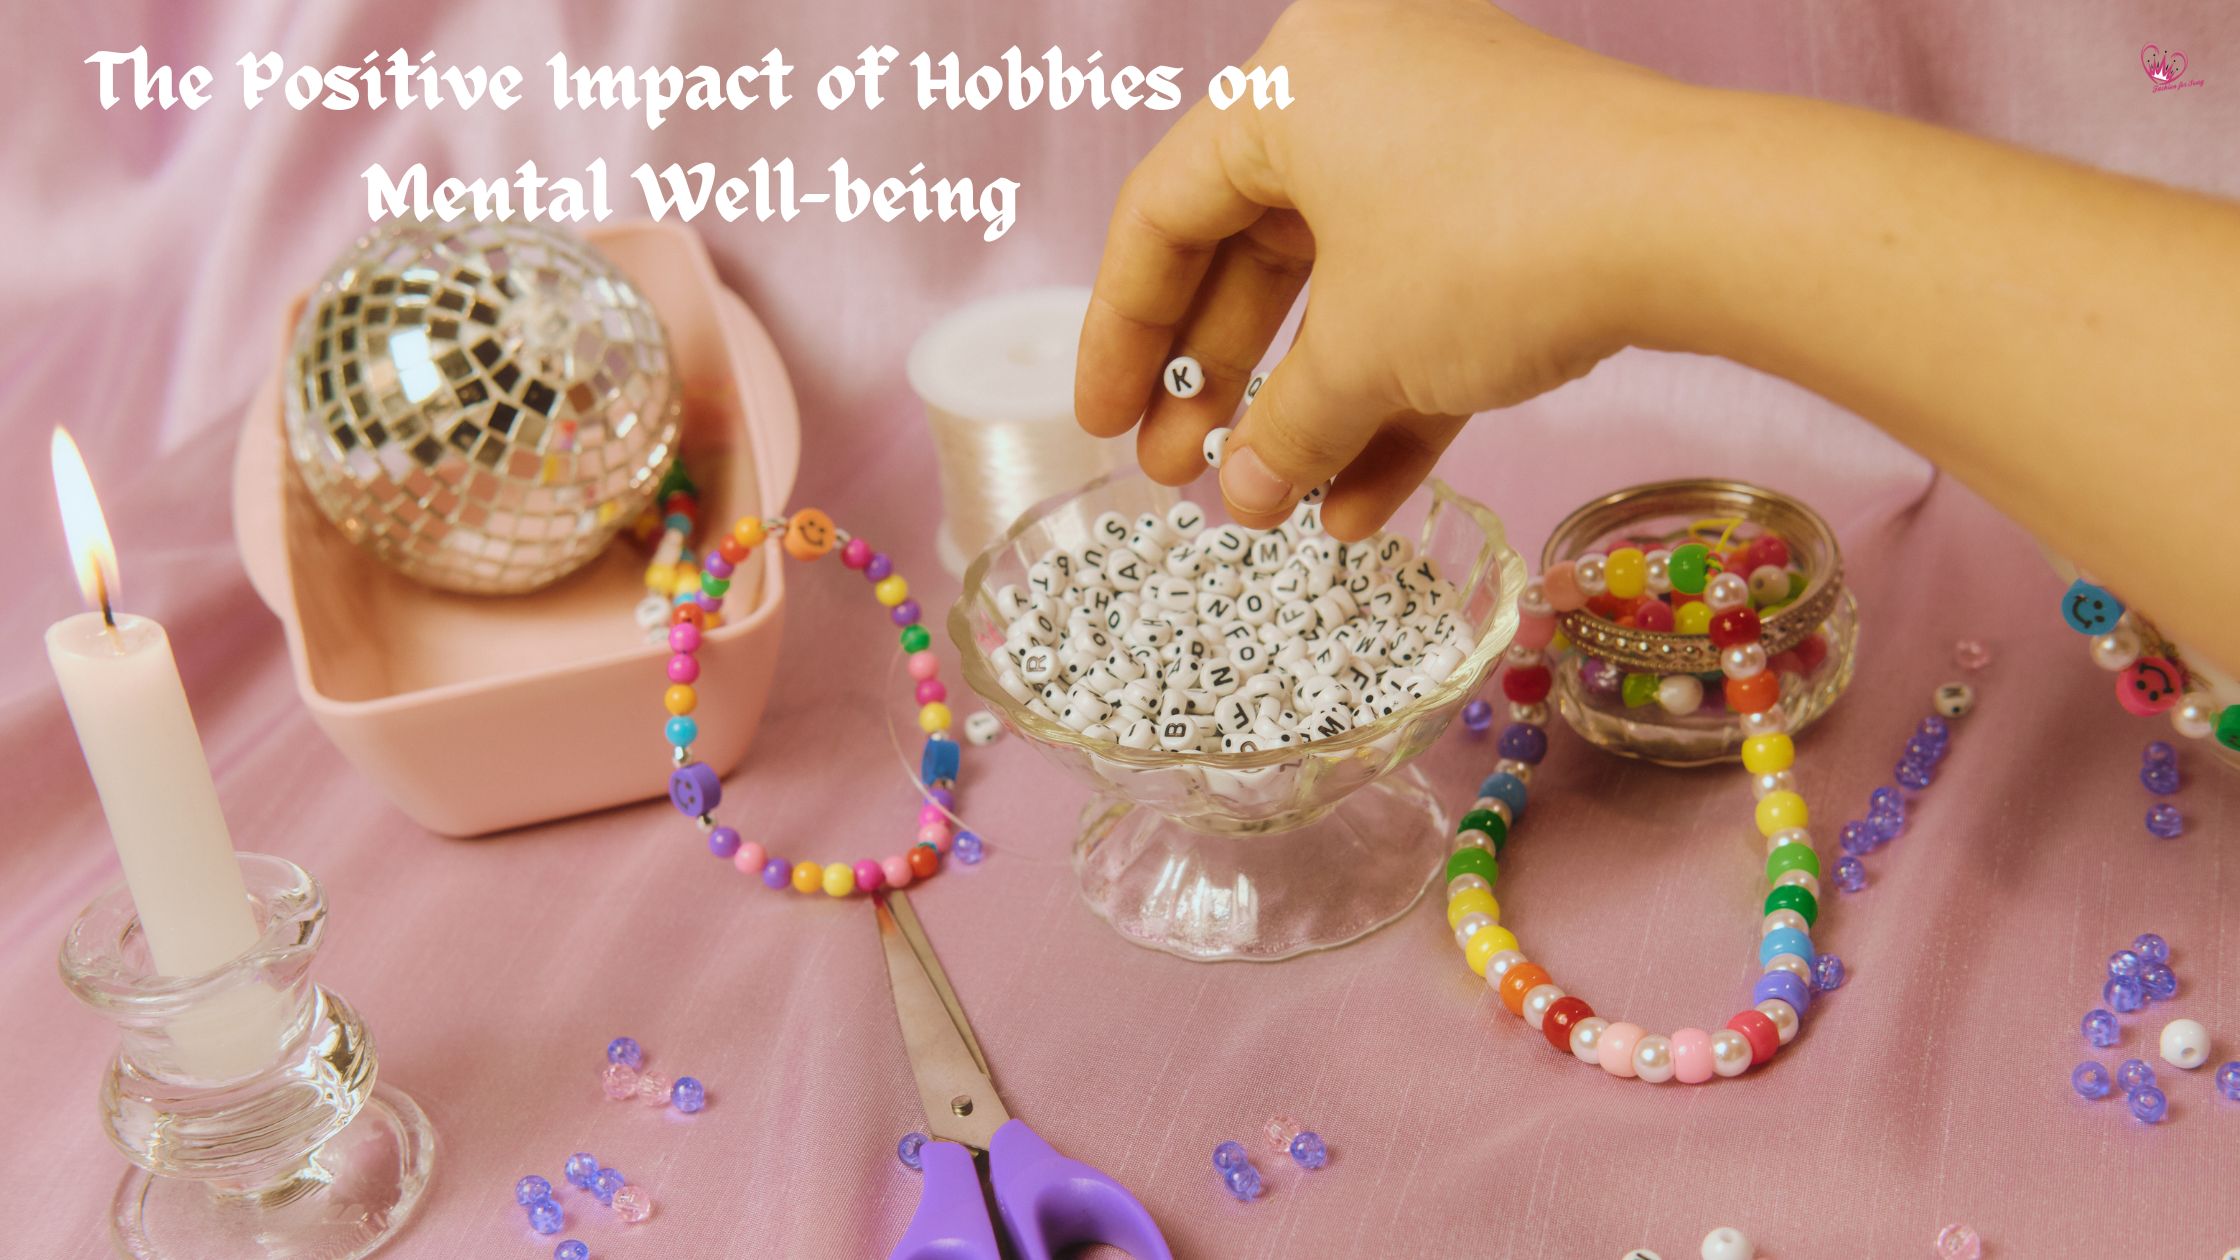 The Positive Impact of Hobbies on Mental Well-being